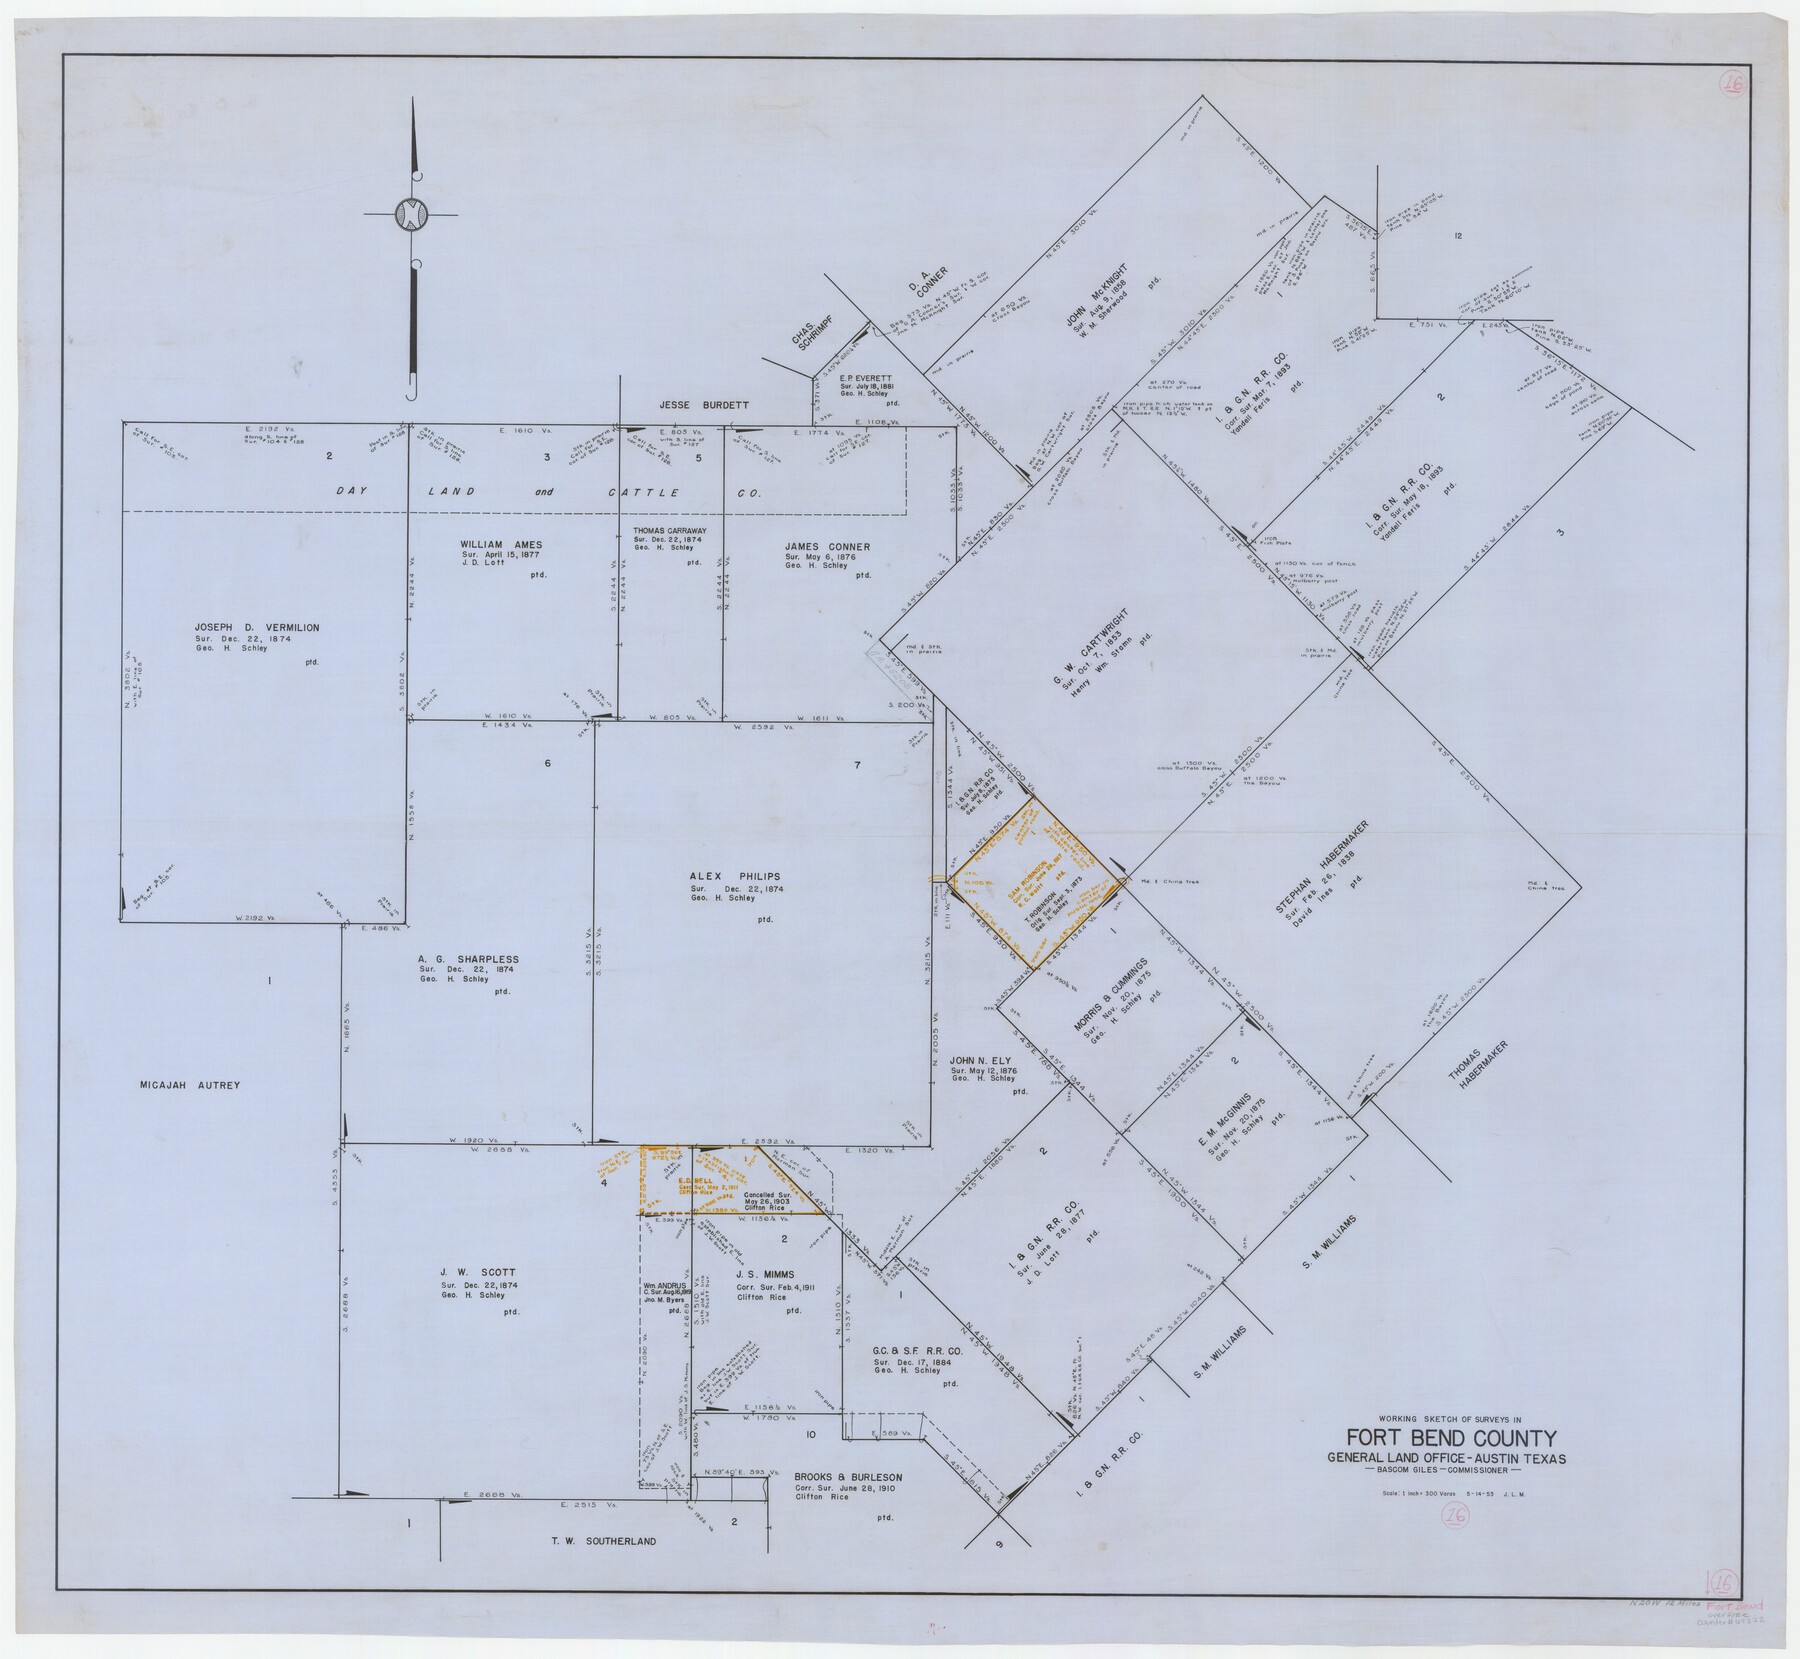 69222, Fort Bend County Working Sketch 16, General Map Collection